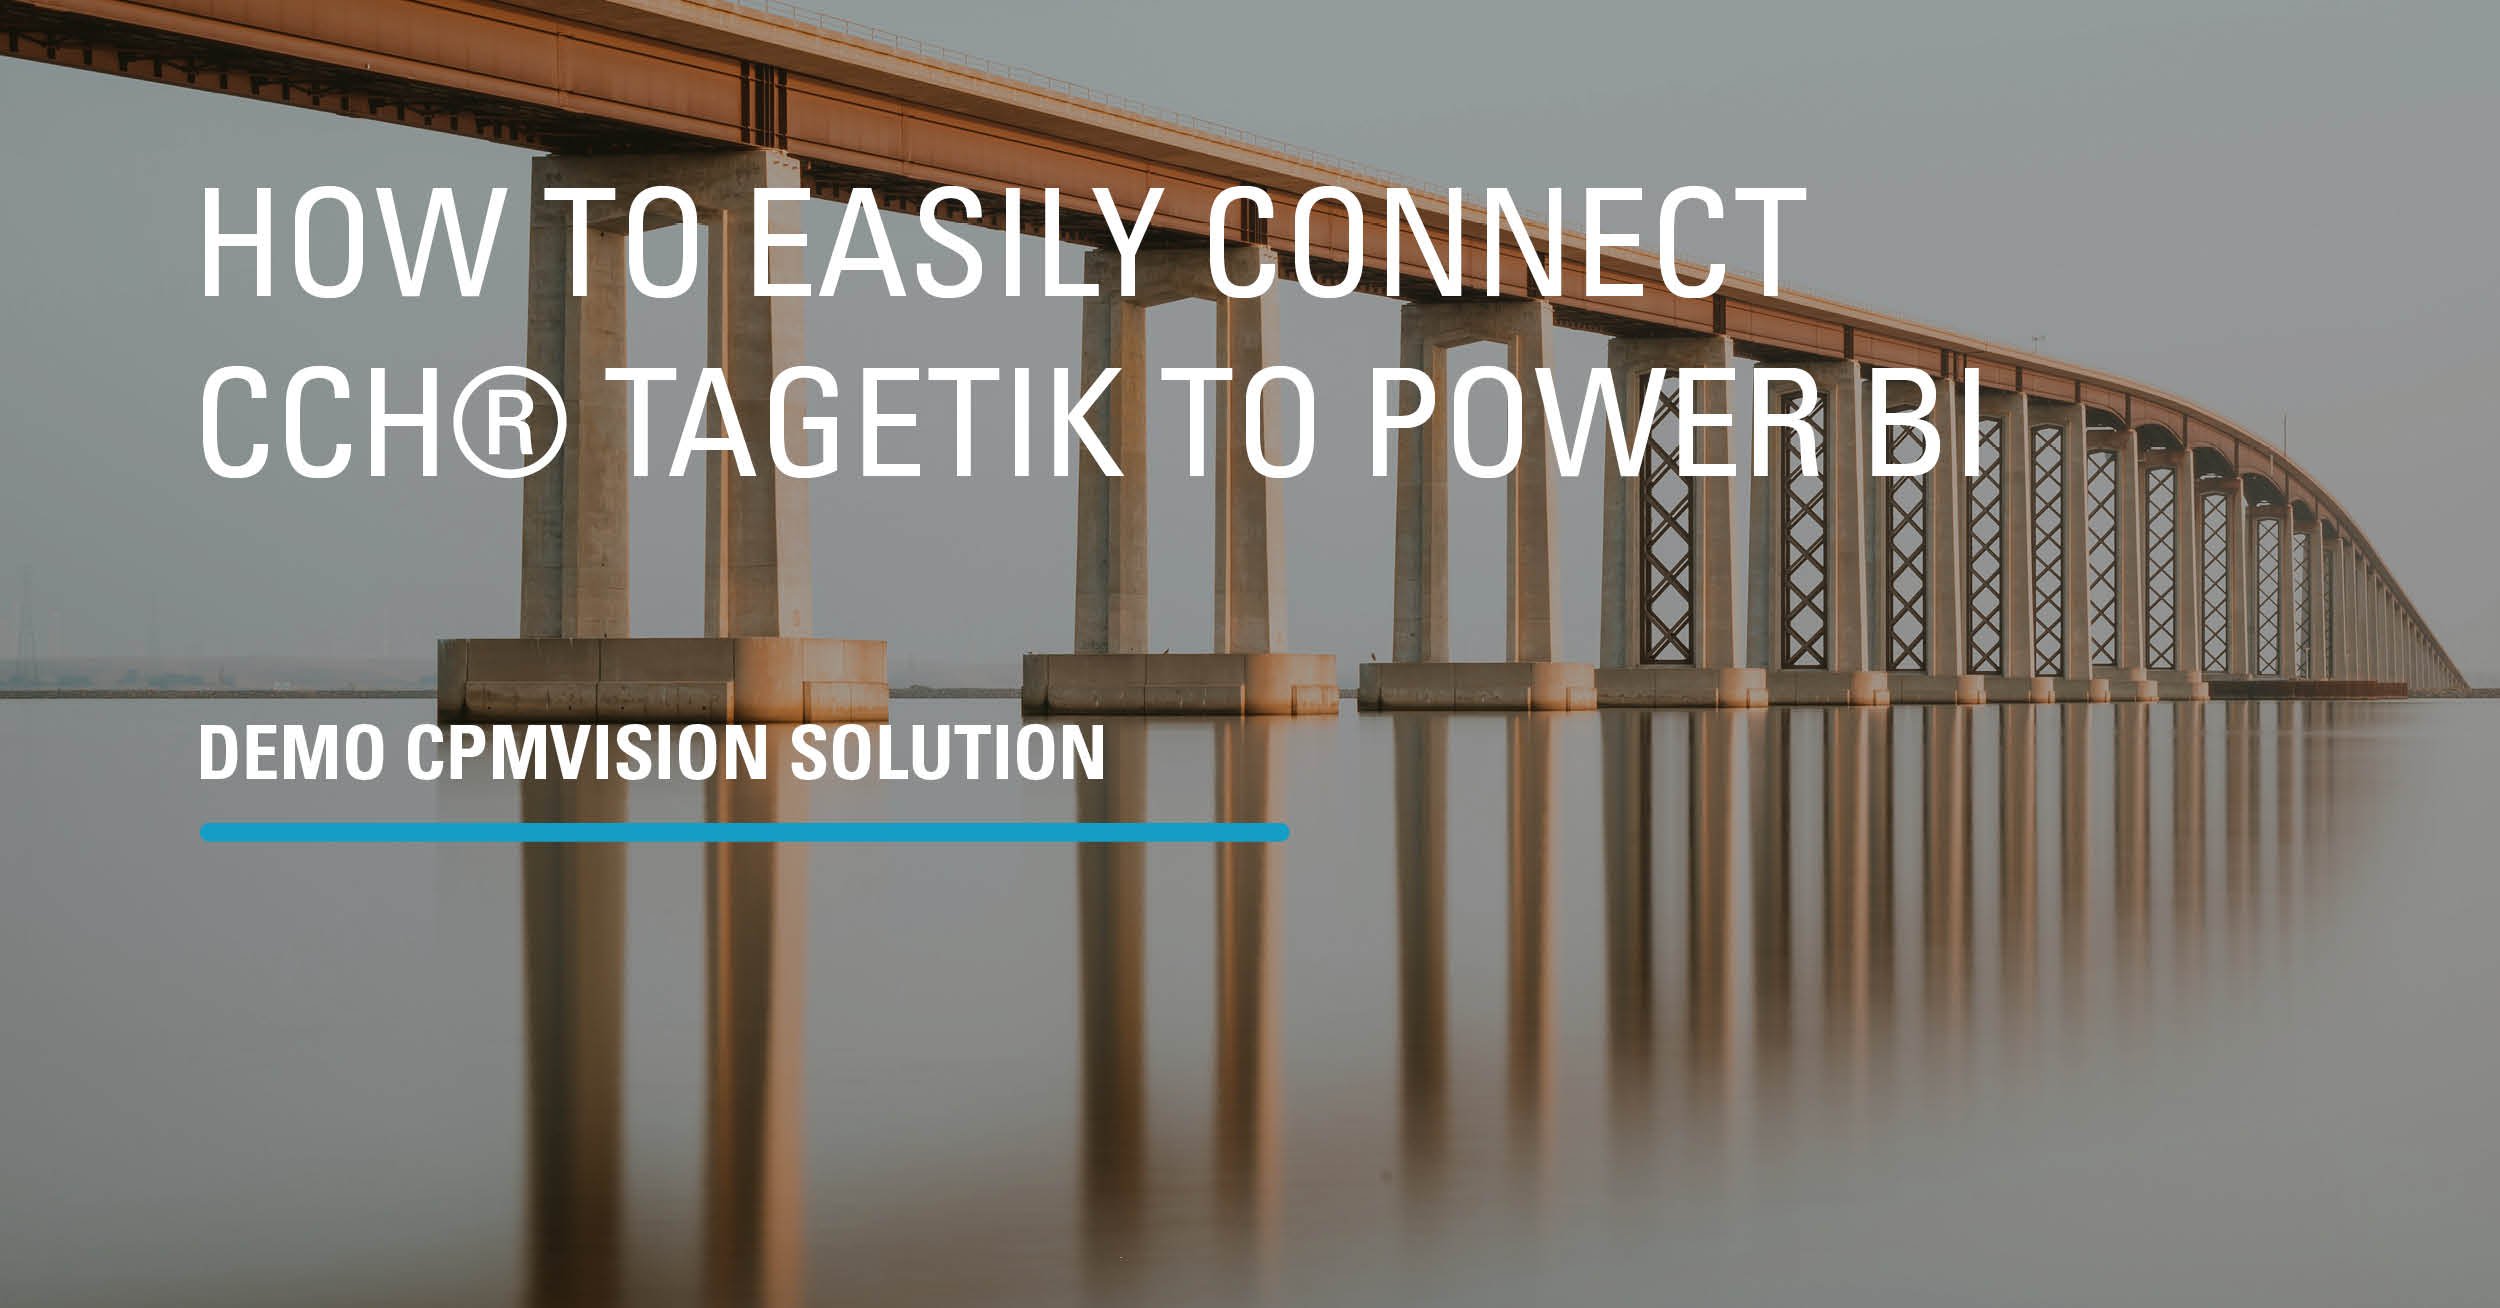 Demo cpmVision solution: how to easily connect CCH® Tagetik to Power BI